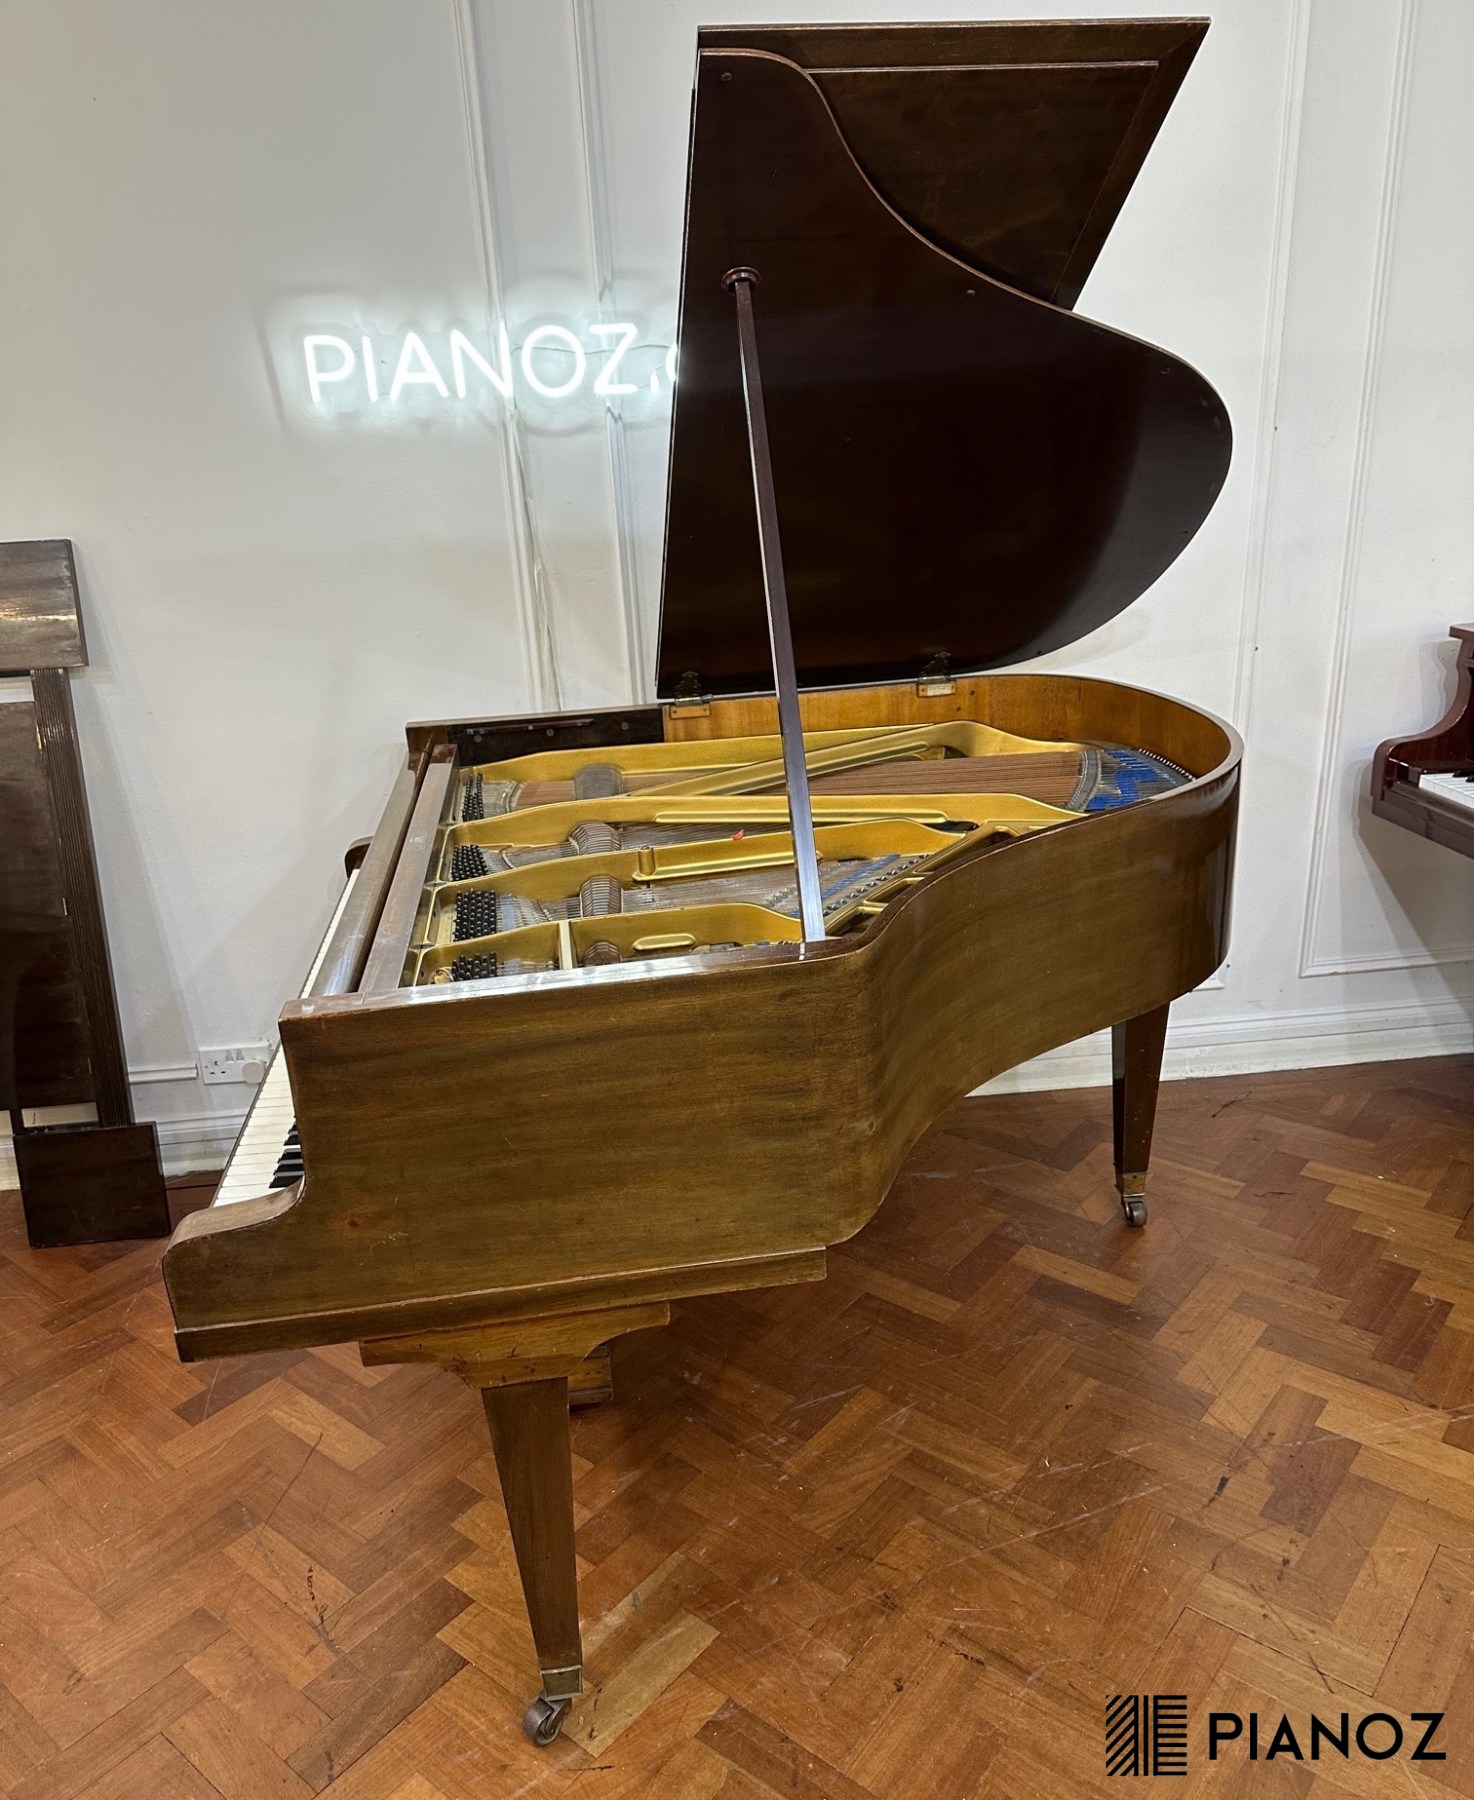 Bluthner Style 4 Baby Grand Piano piano for sale in UK